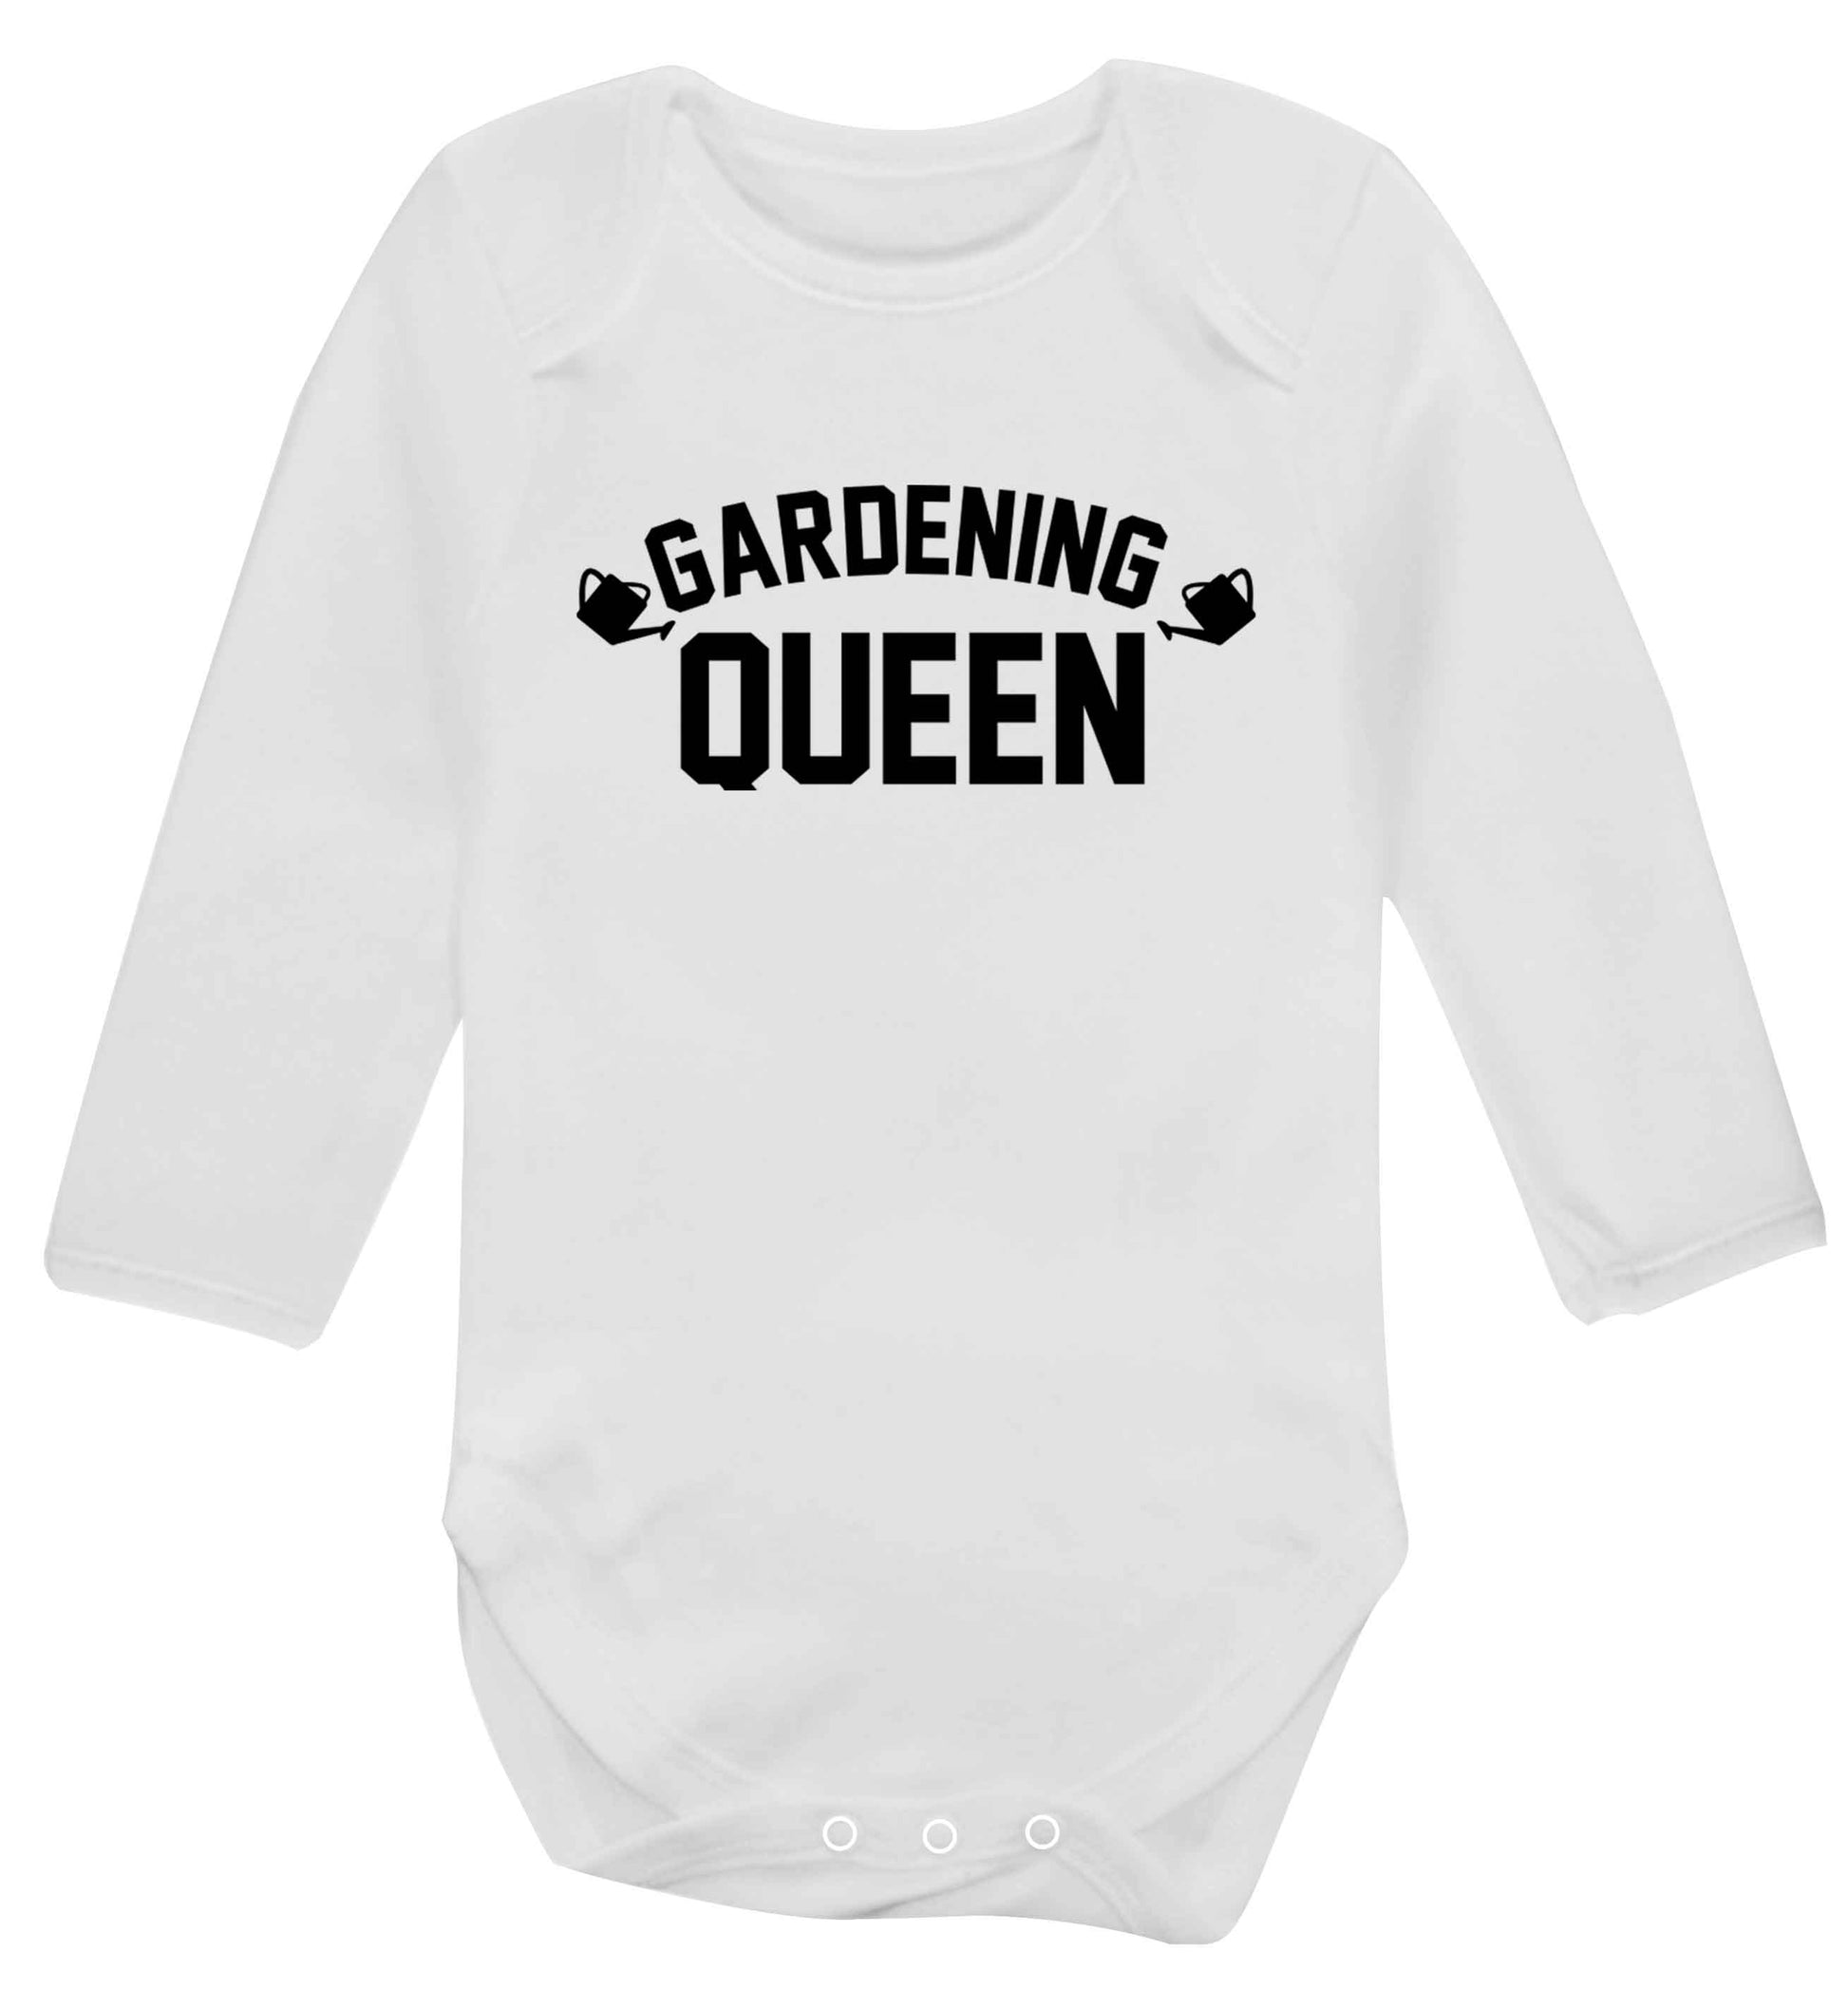 Gardening queen Baby Vest long sleeved white 6-12 months